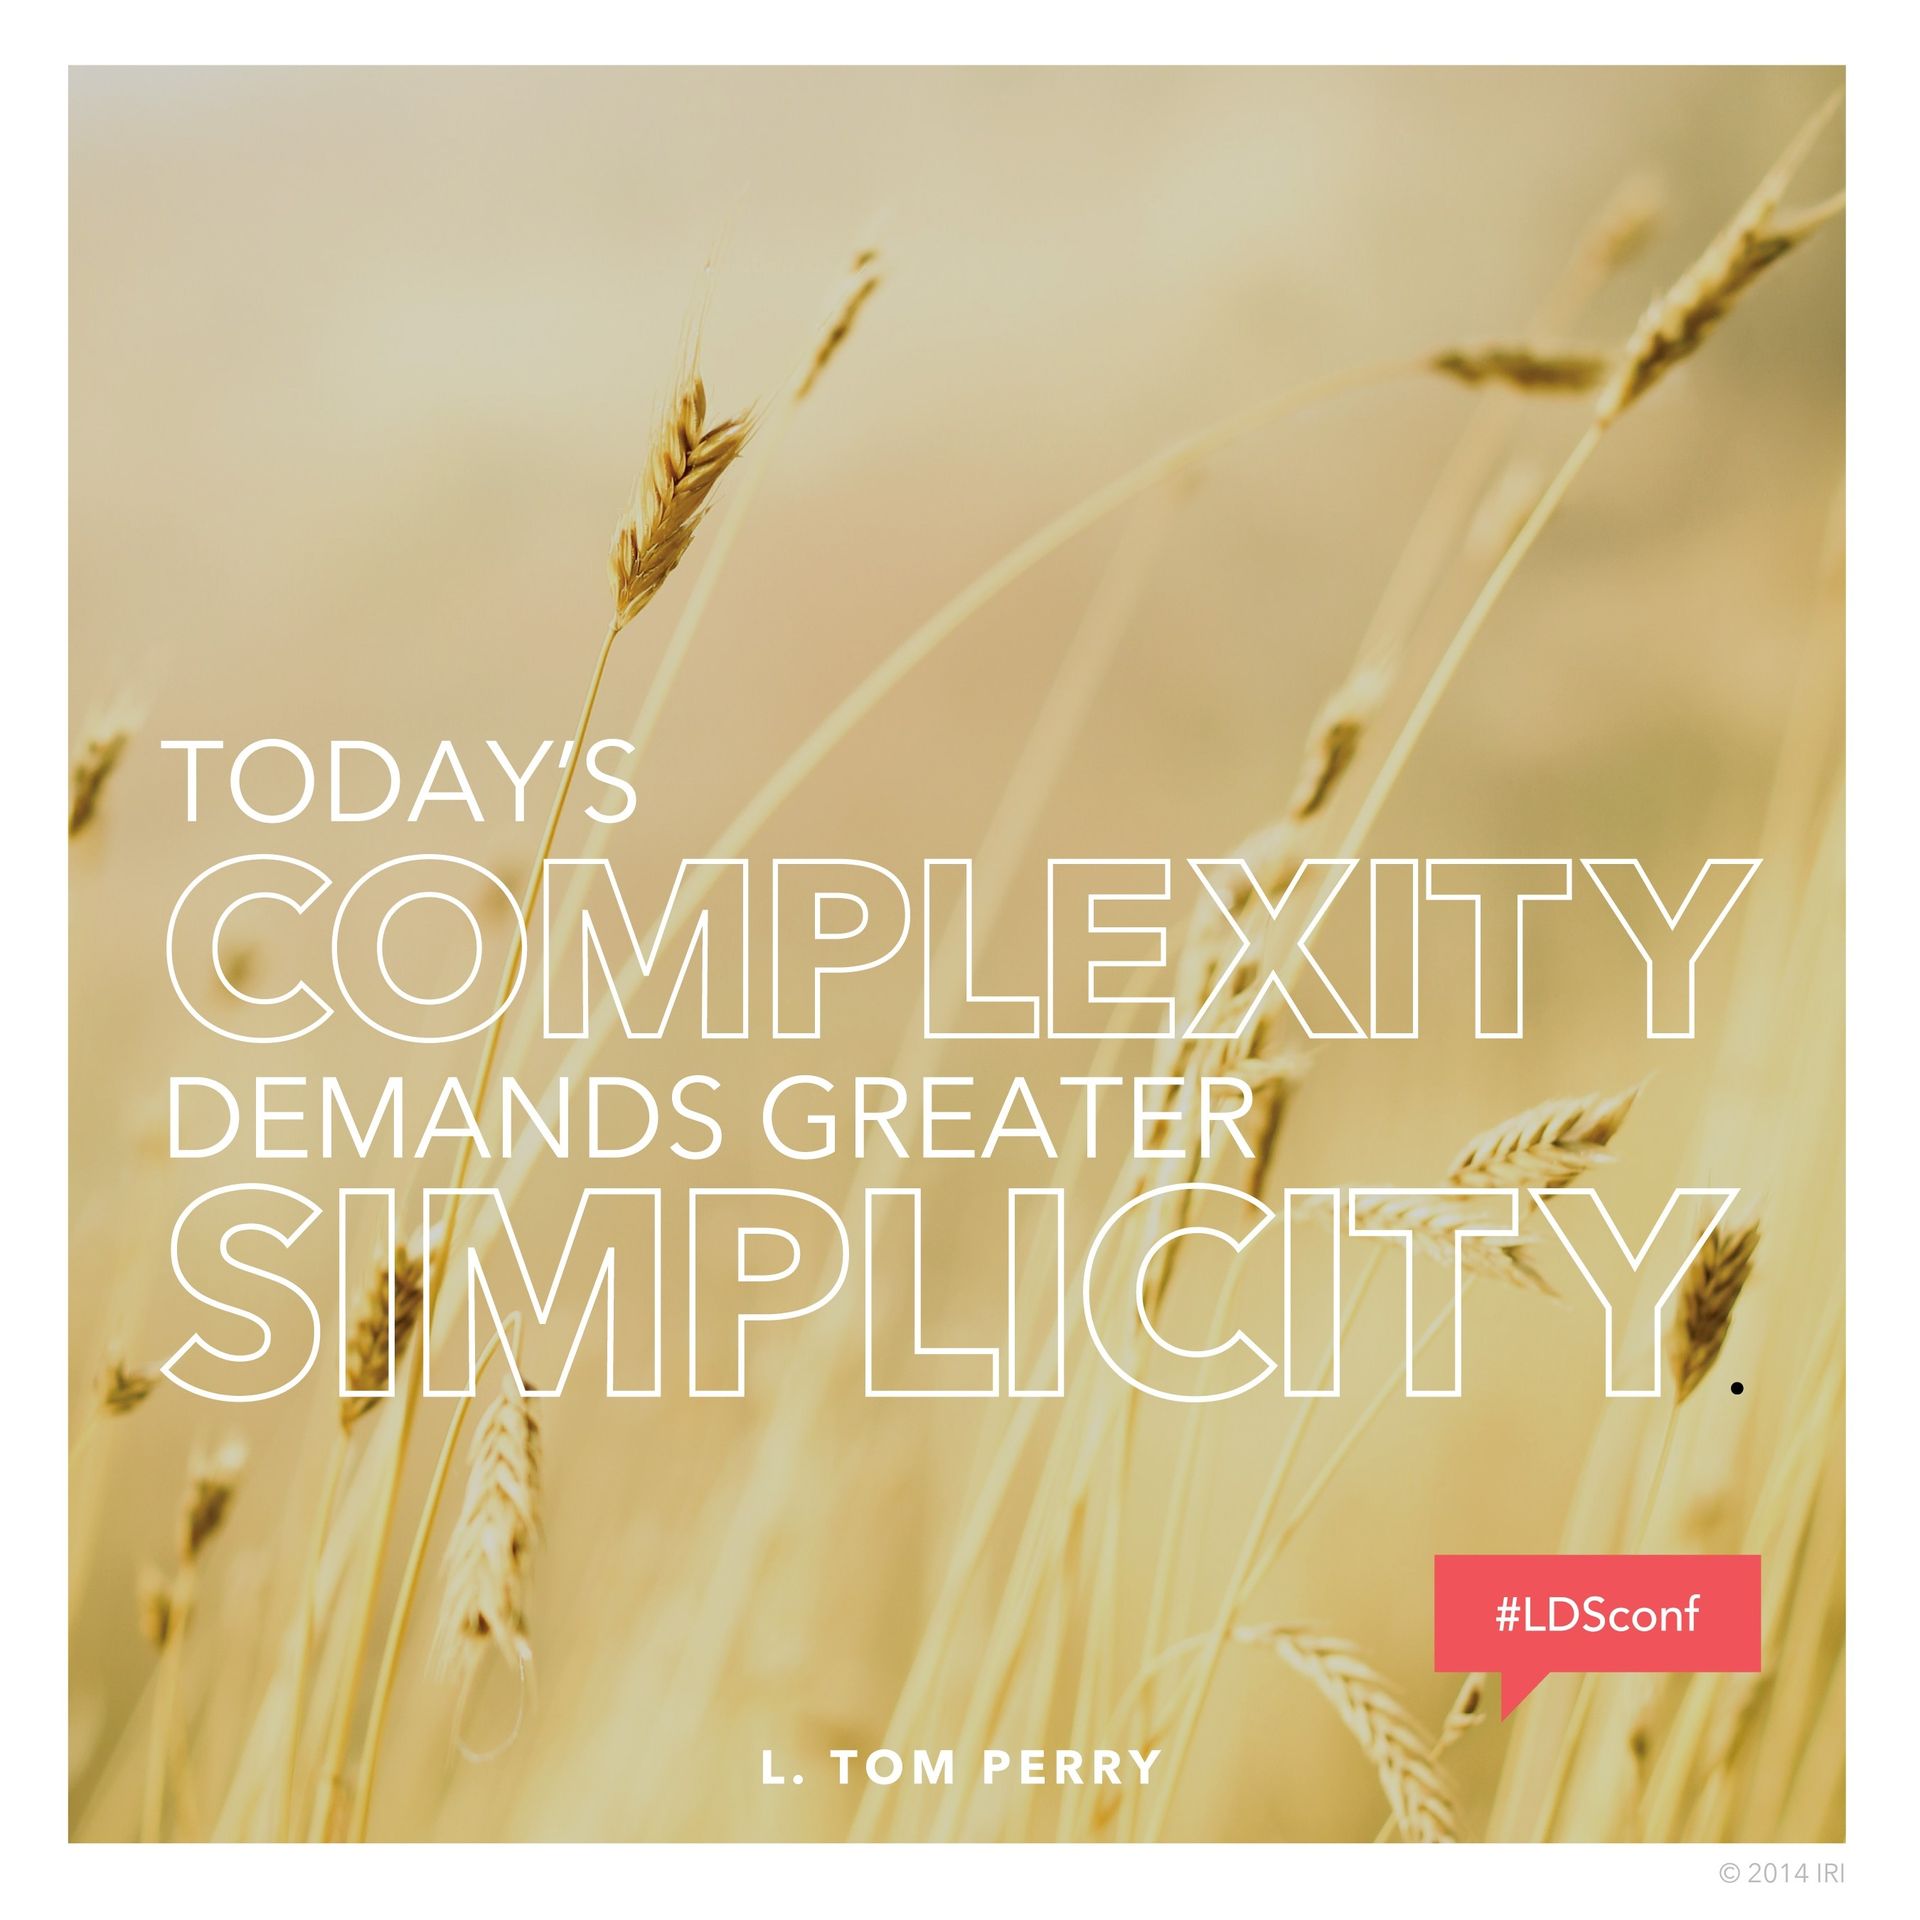 “Today’s complexity demands greater simplicity.”—Elder L. Tom Perry, “Obedience through Our Faithfulness” © undefined ipCode 1.